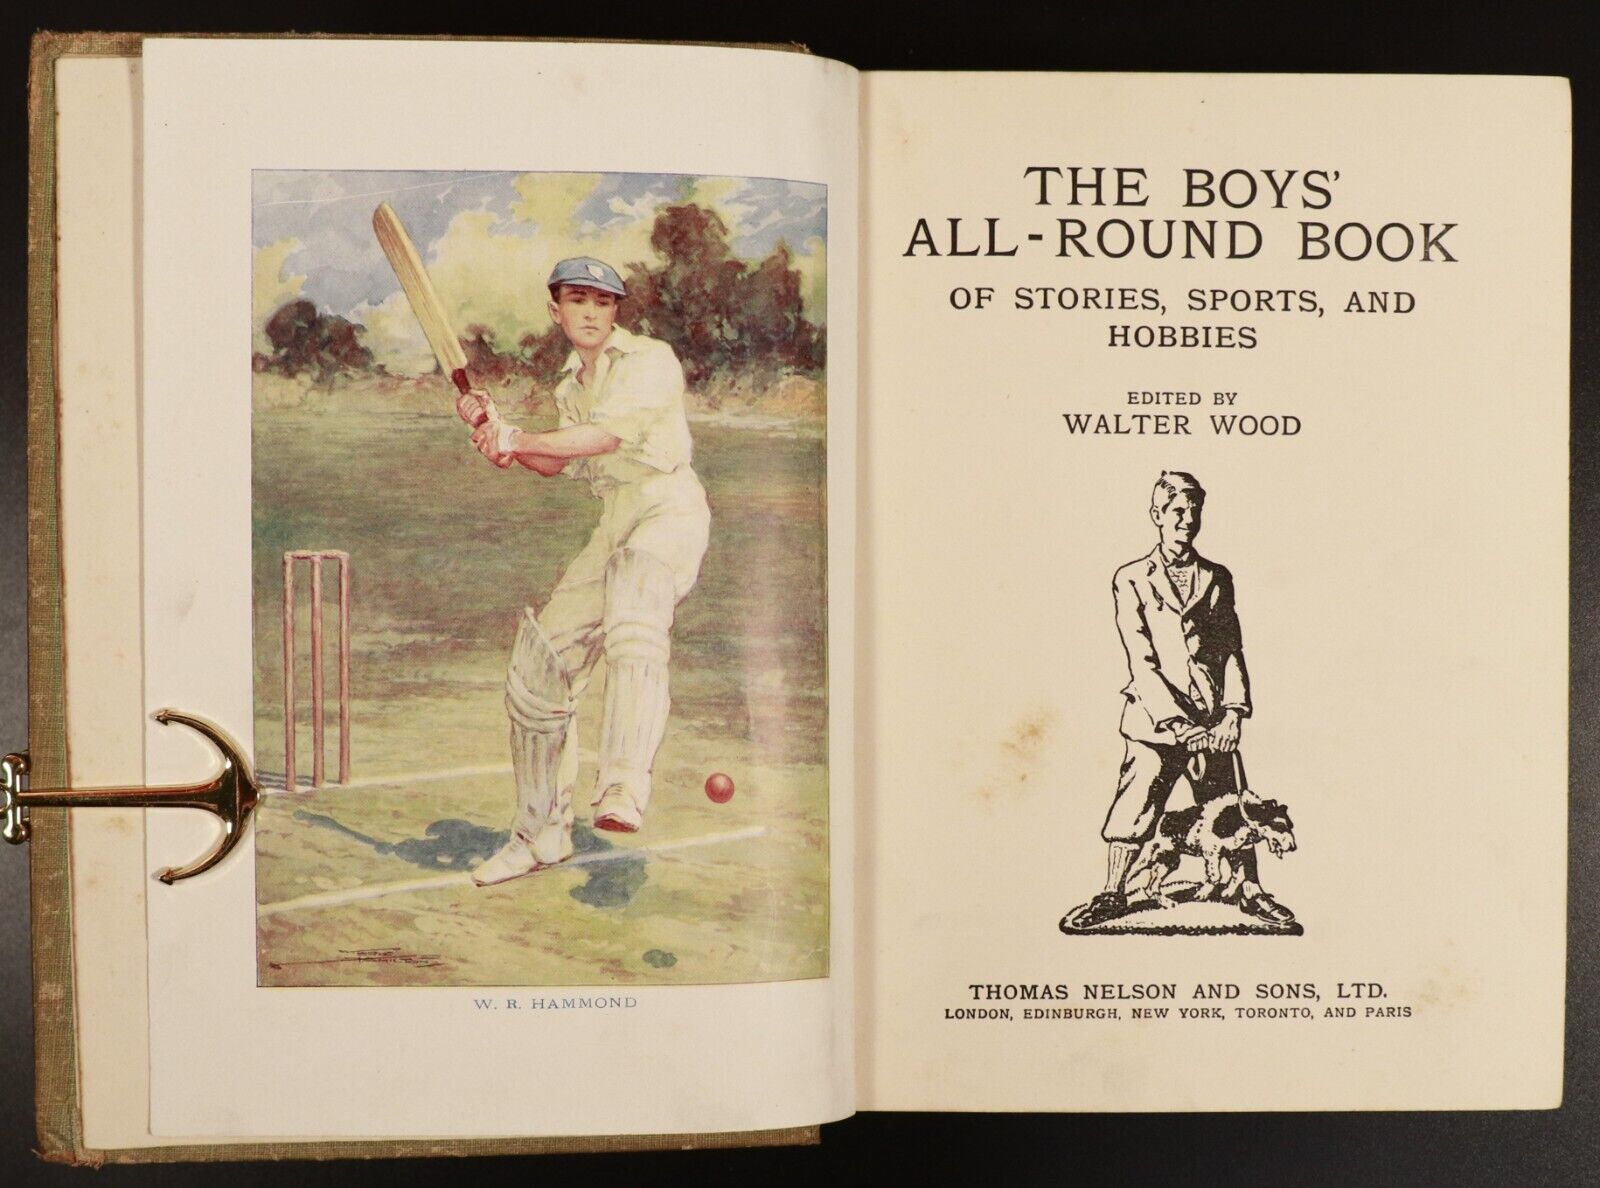 c1930 The Boys All-Round Book by Walter Wood Antique Illustrated Childrens Book - 0